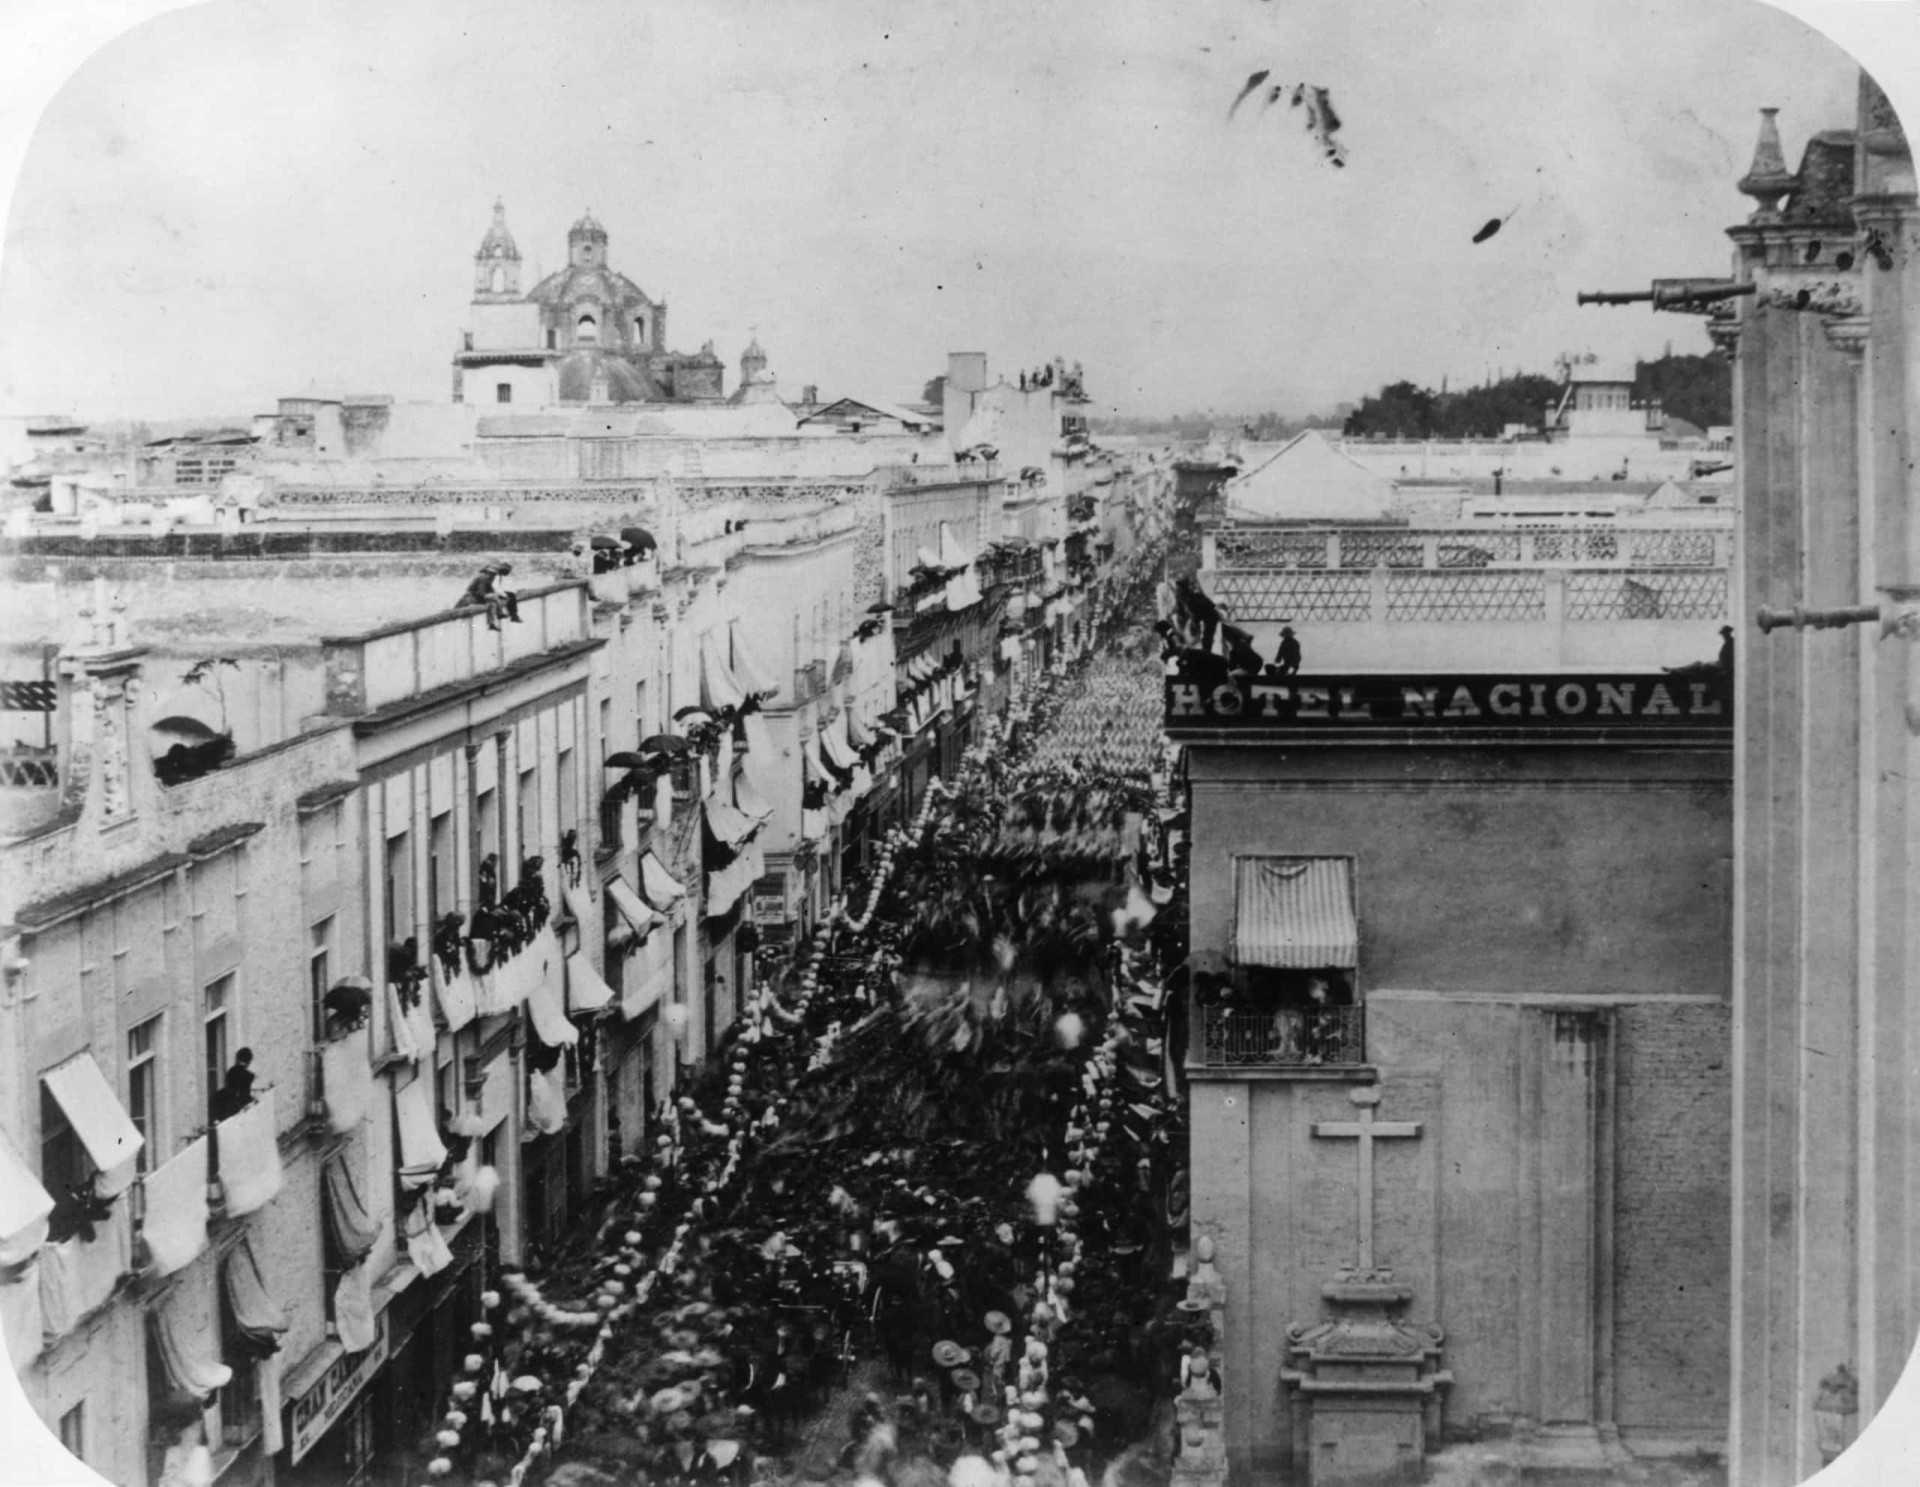 Here's a view of the sprawling city, showing the entry of Mexican President Benito Juarez in 1867.